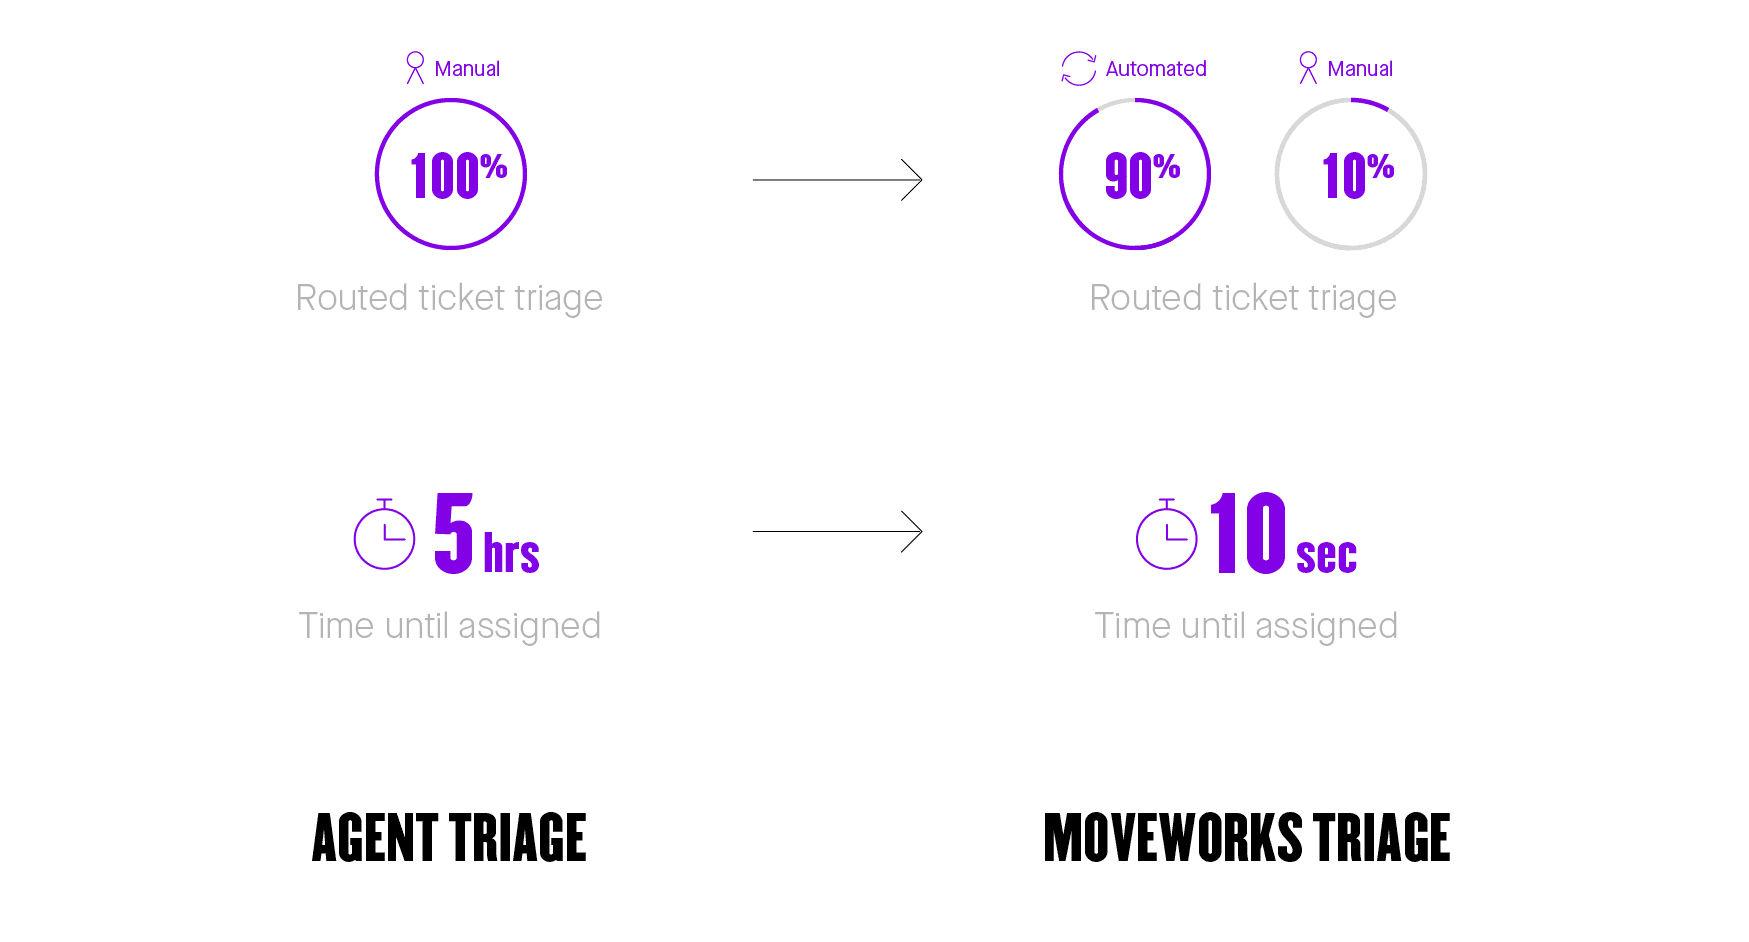 automated ticket triaging is finally a reality